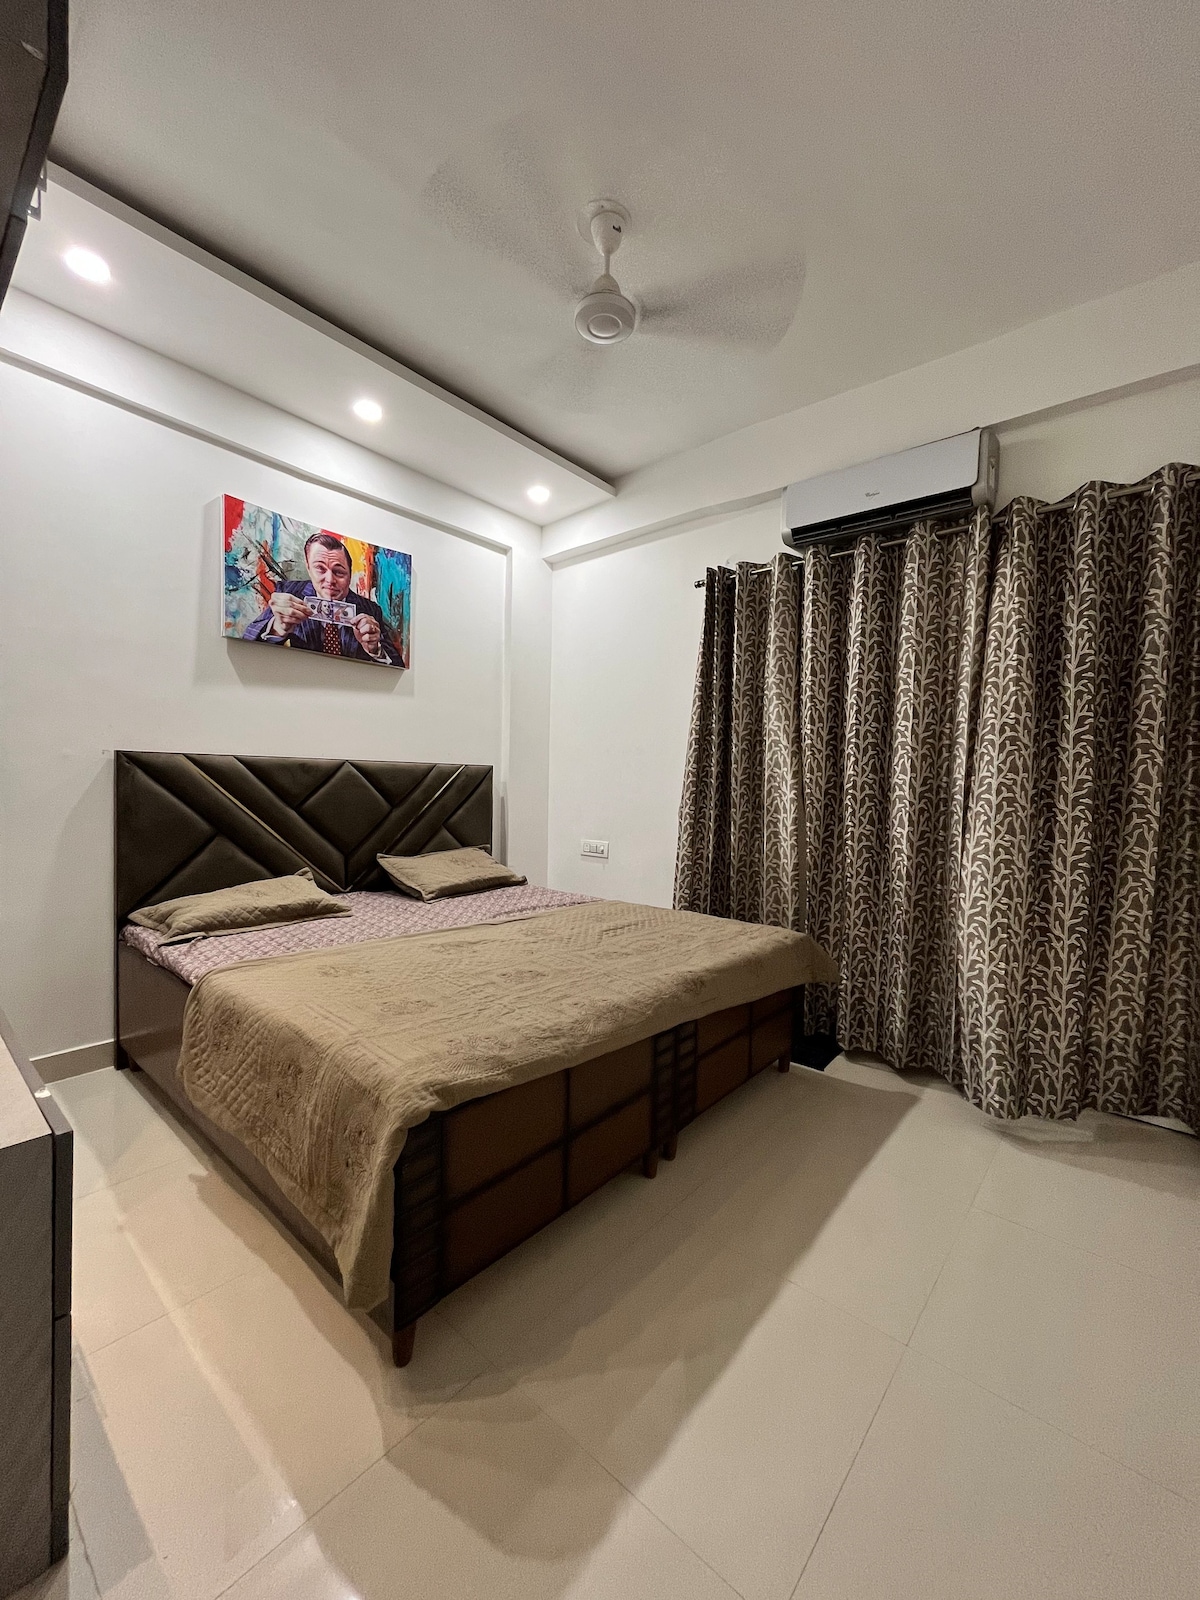 2BHK Good Flat For Sharing Room